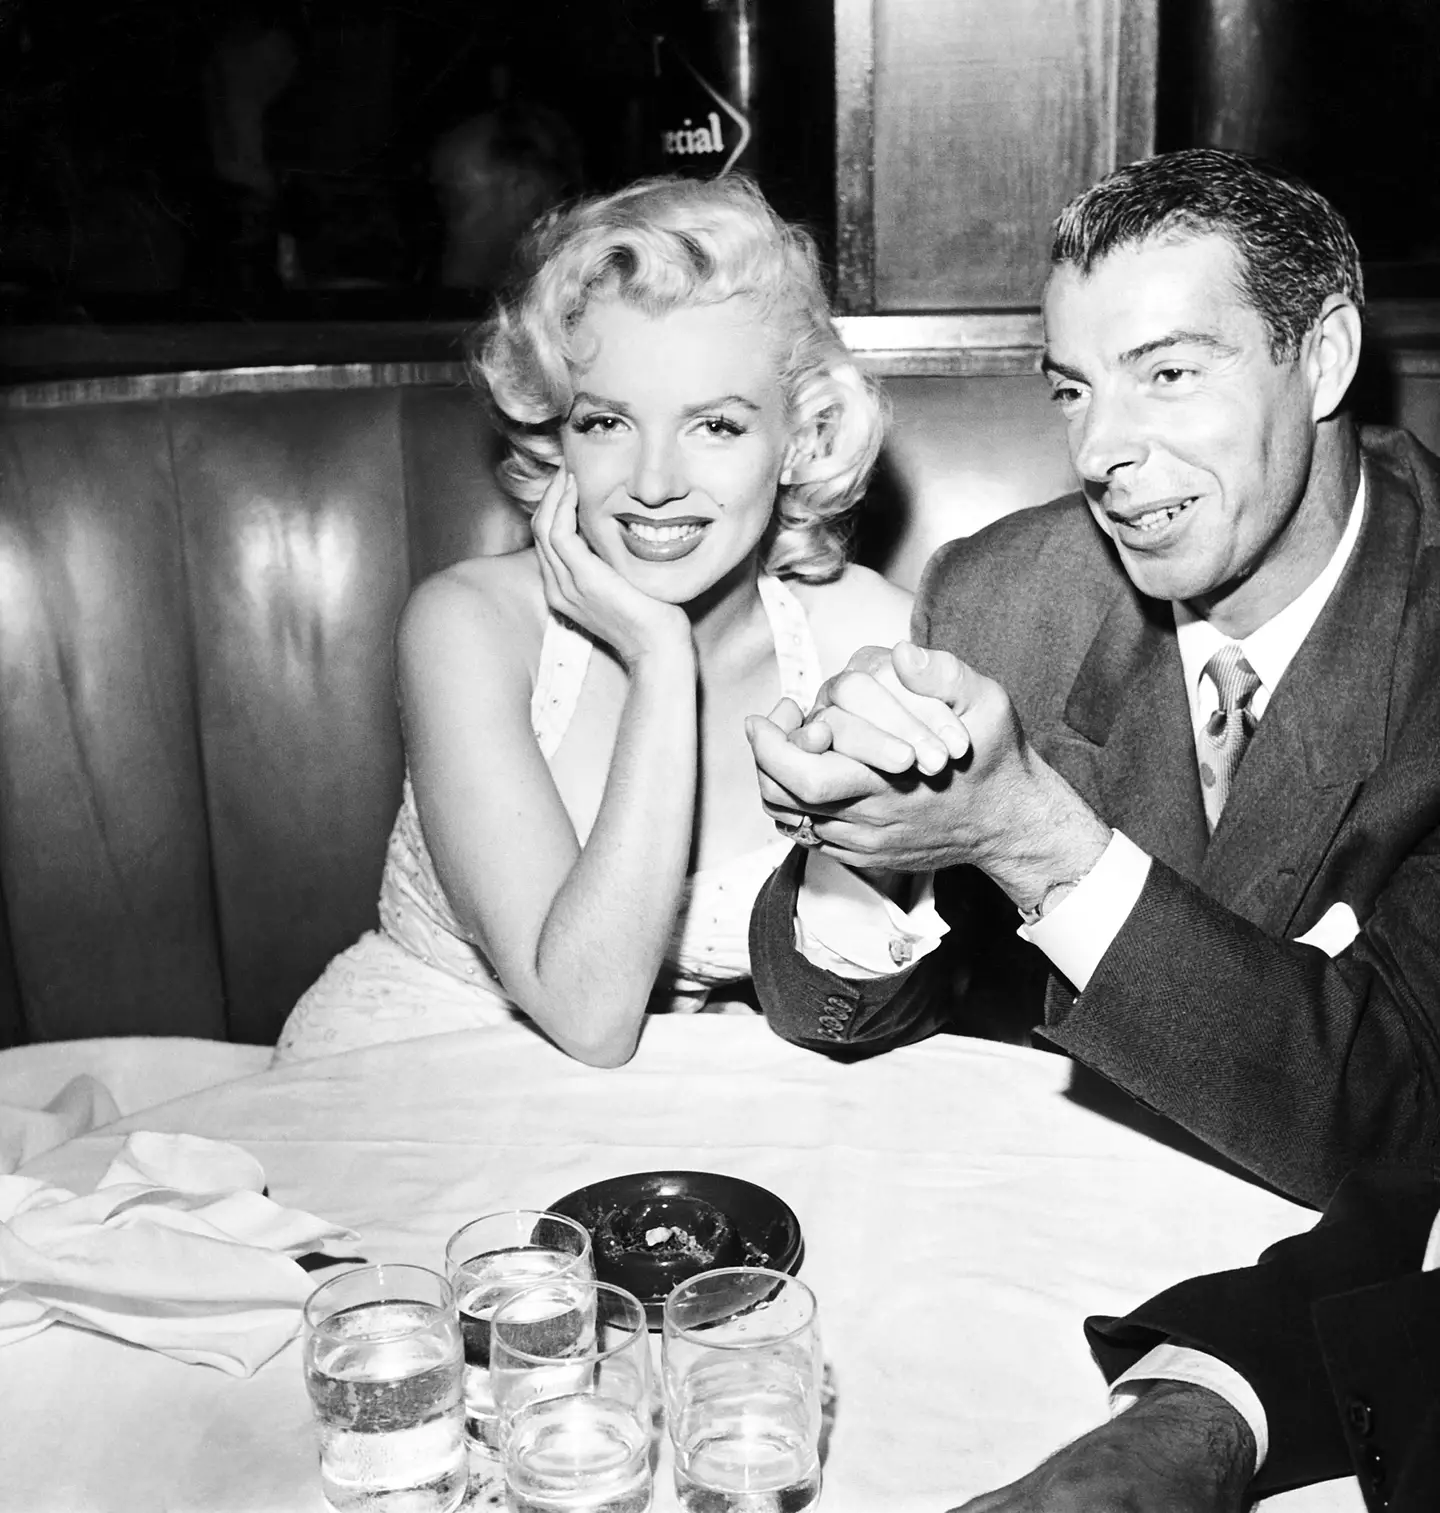 Monroe's body was claimed by her ex-husband Joe DiMaggio, who she remained friends with.